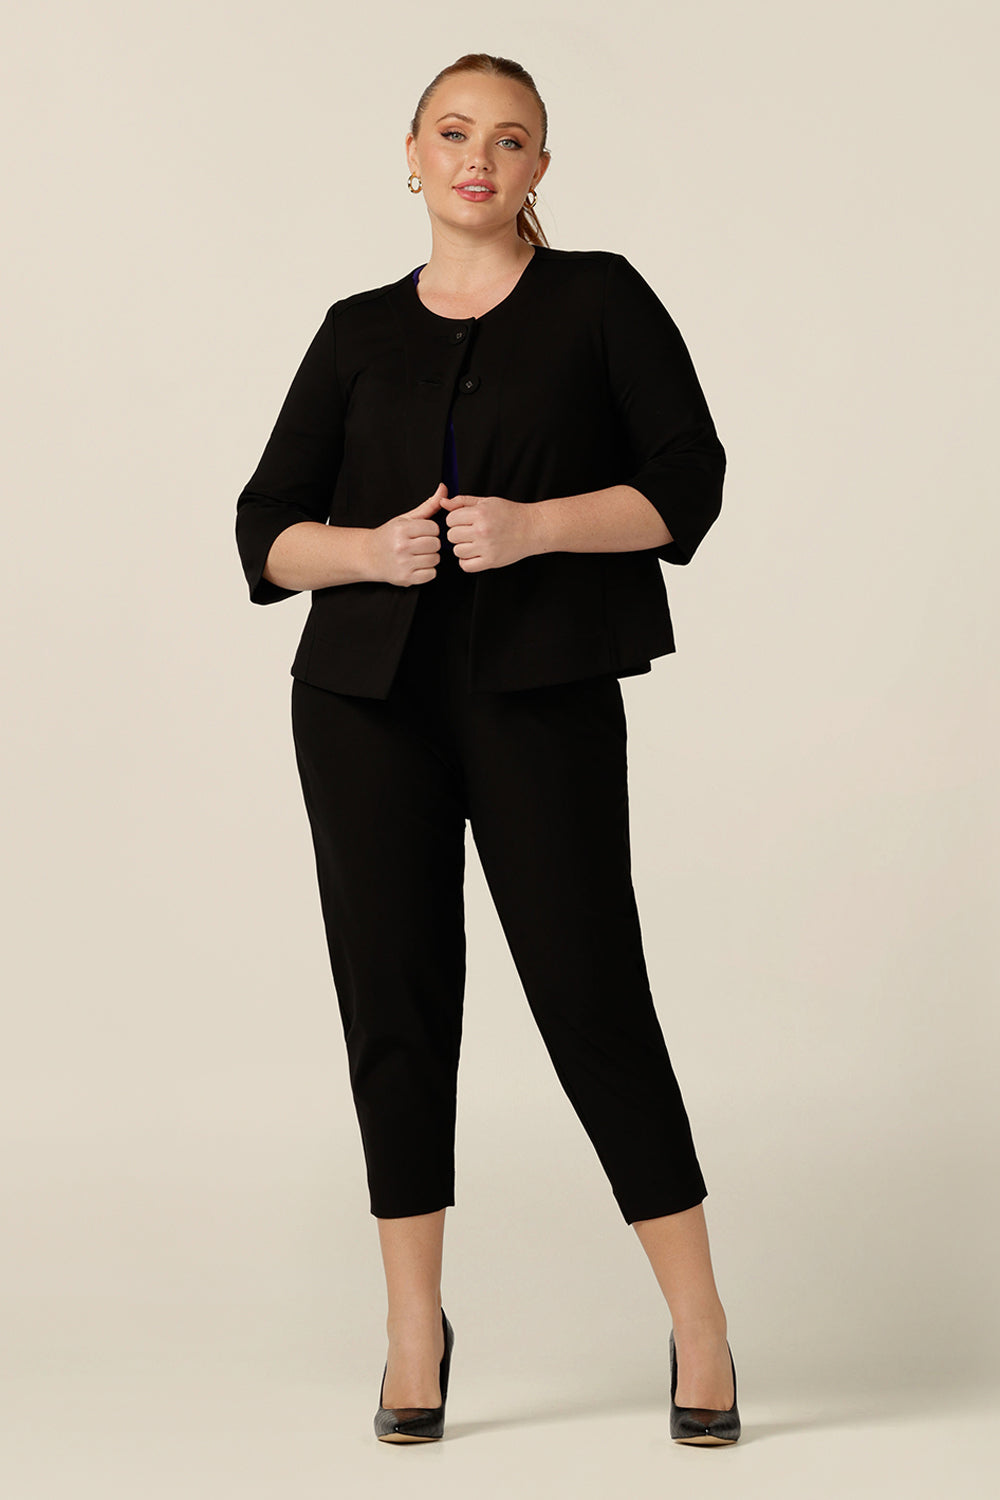 A curvy size 12 woman wears a black swing jacket for alternative workwear. Featuring round collarless neckline with 2-button fastenings, 3/4 sleeves and swing back, this black jacket has a sophisticated corporate elegance with made-in-Australia quality.